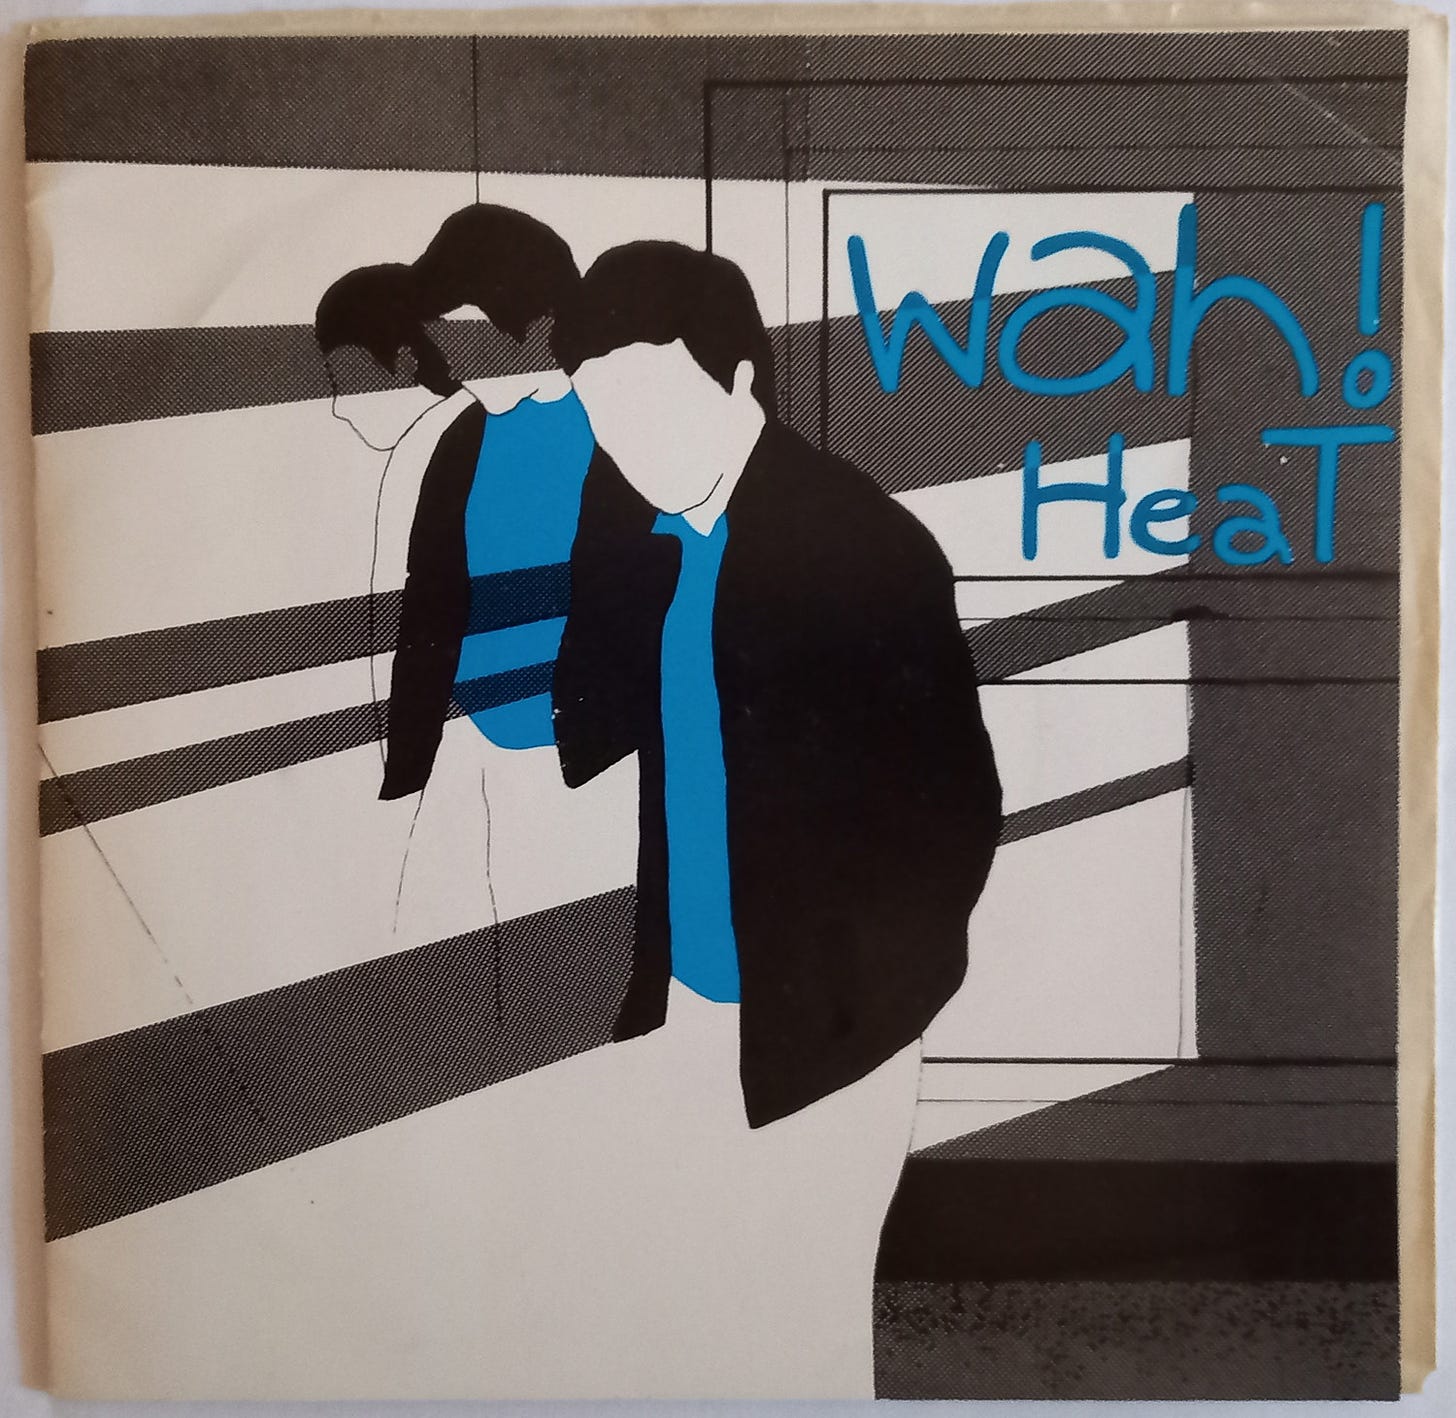 A seven-inch record sleeve. The design is black, white and blue with a drawing of three young men and the words "Wah! Heat".